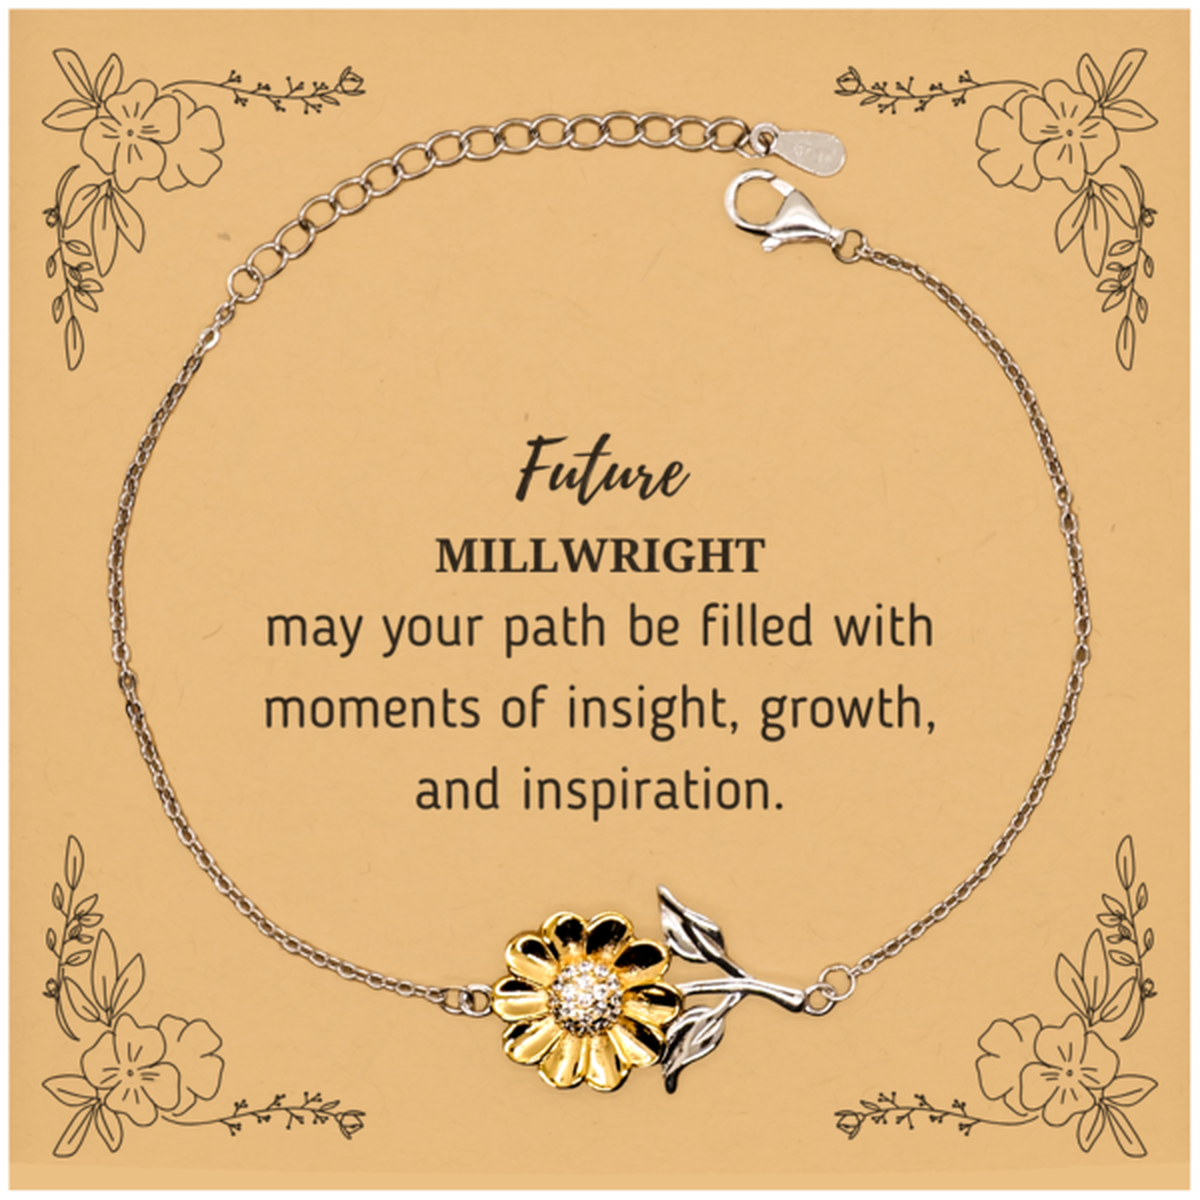 Future Millwright Gifts, May your path be filled with moments of insight, Graduation Gifts for New Millwright, Christmas Unique Sunflower Bracelet For Men, Women, Friends